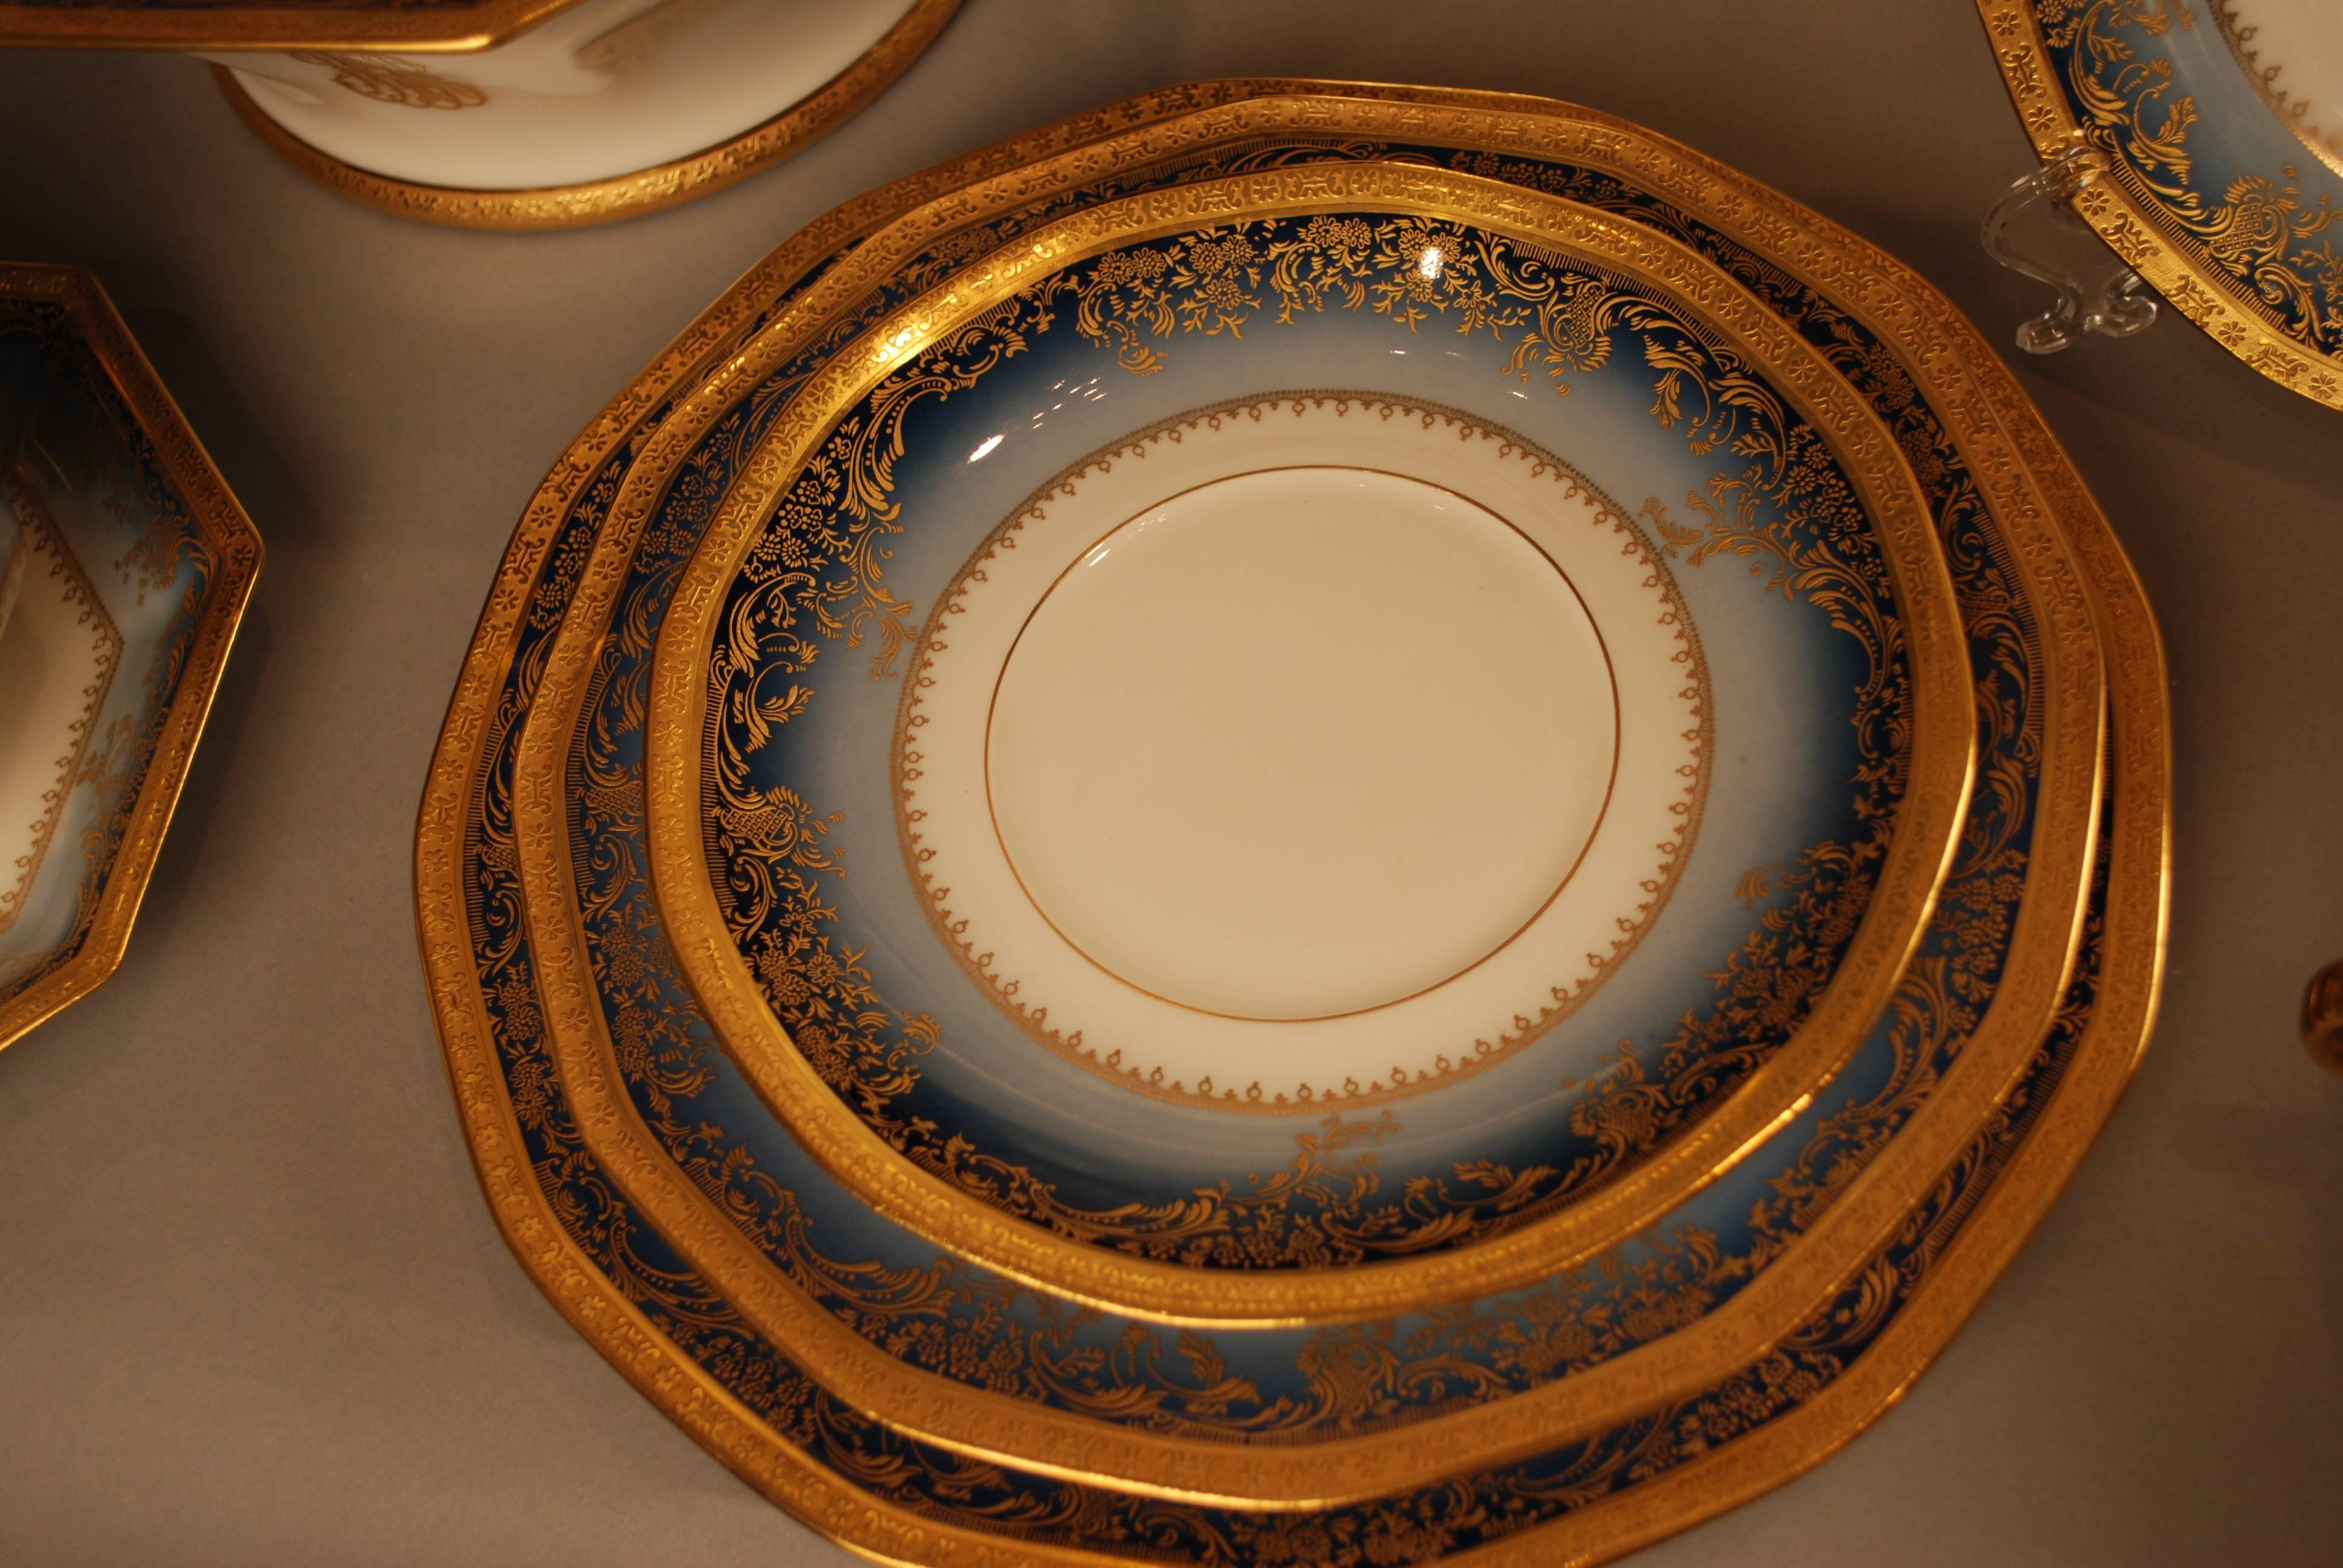 French Limoges Haviland Dinner Service, Second Presidential China Edition, circa 1938